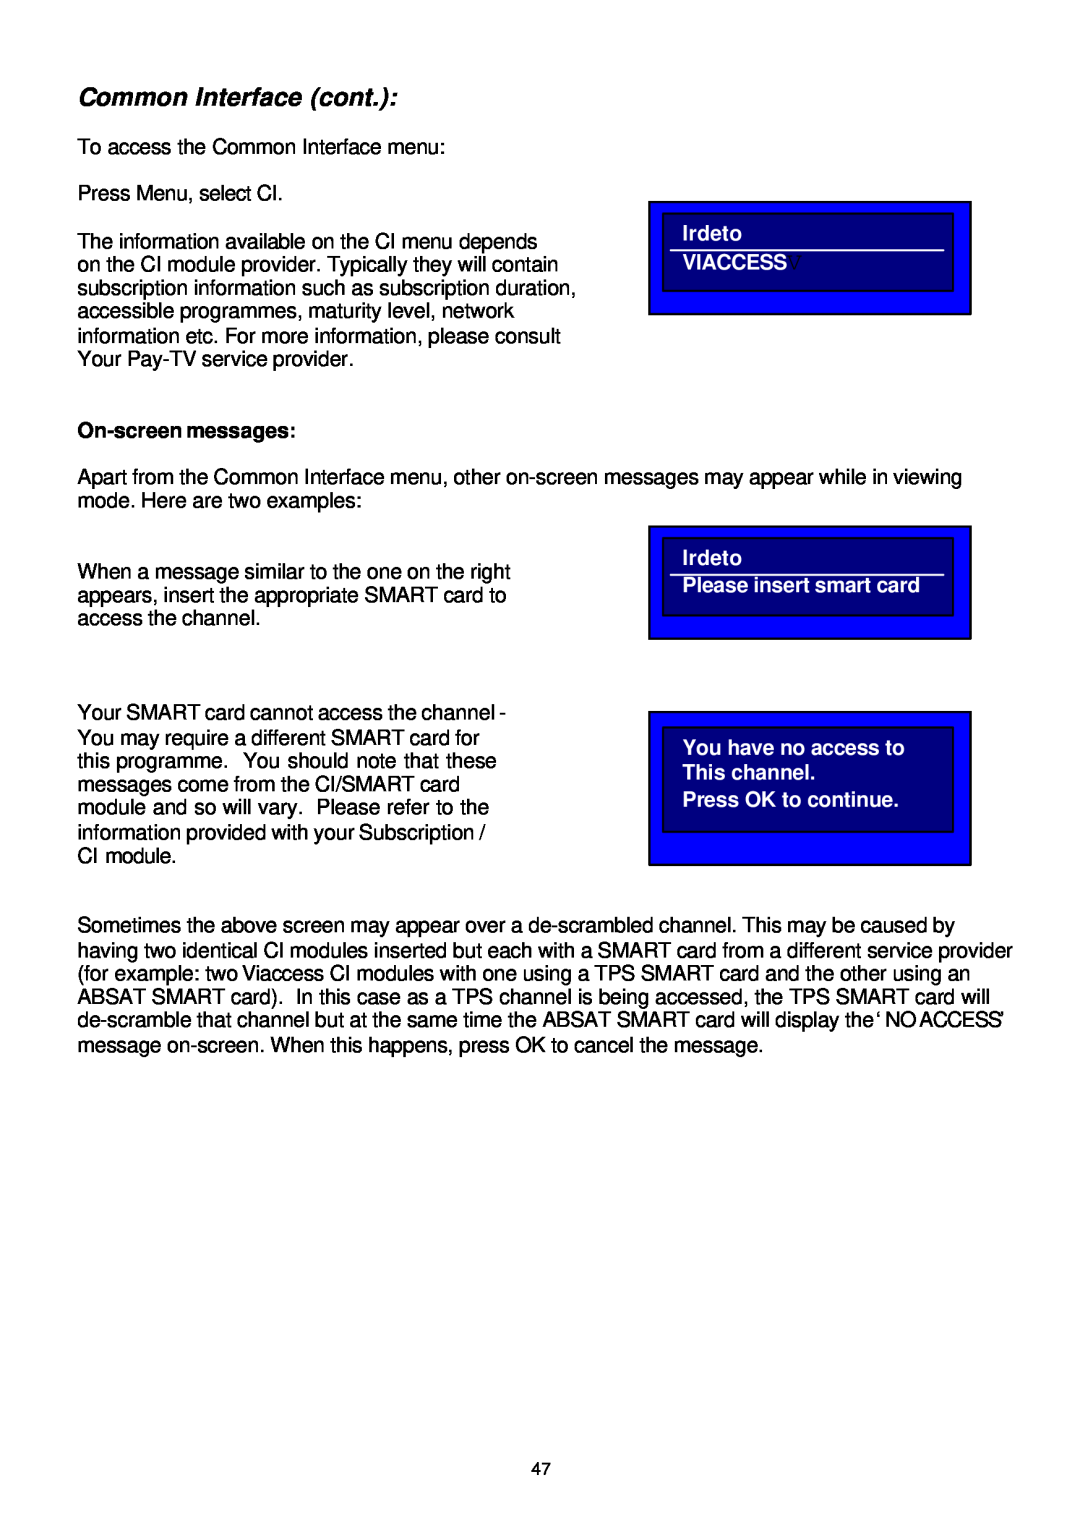 Samsung SADPCI-202 instruction manual Common Interface cont, On-screenmessages 